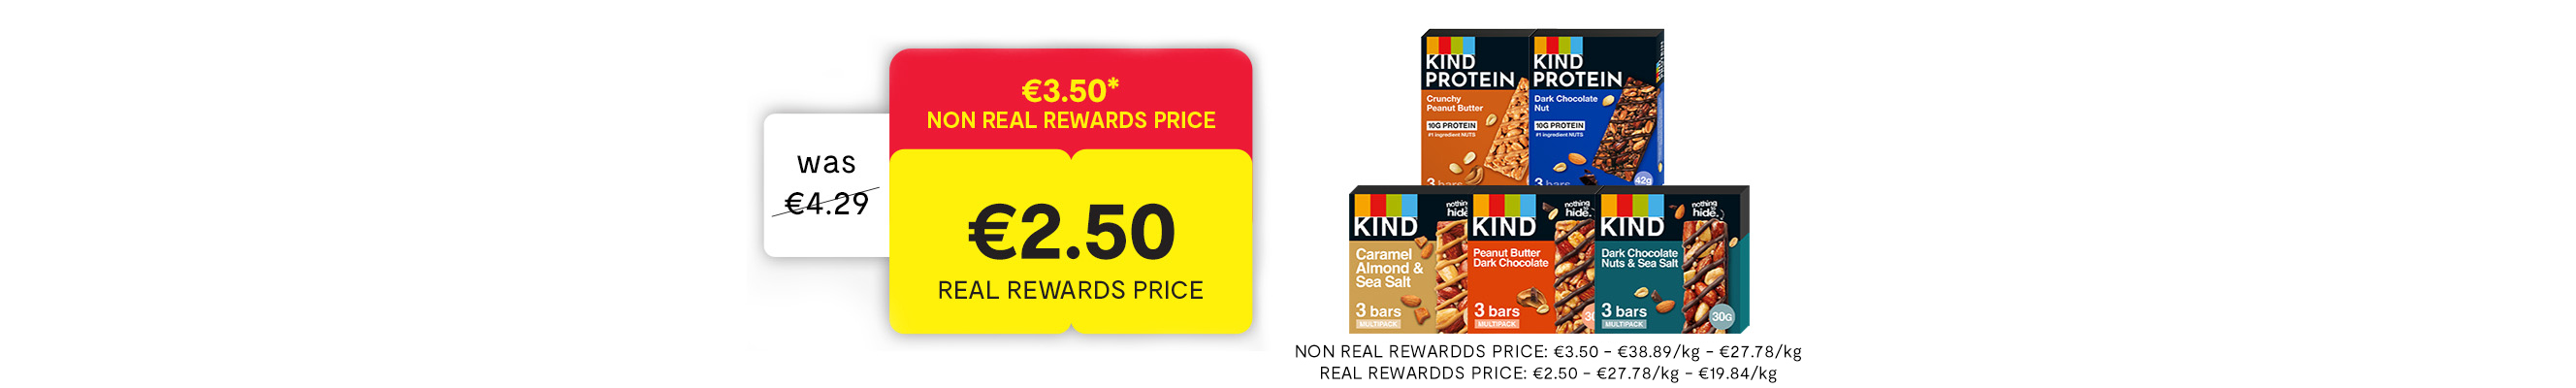 Real Rewards Prices Weekly Offer 3